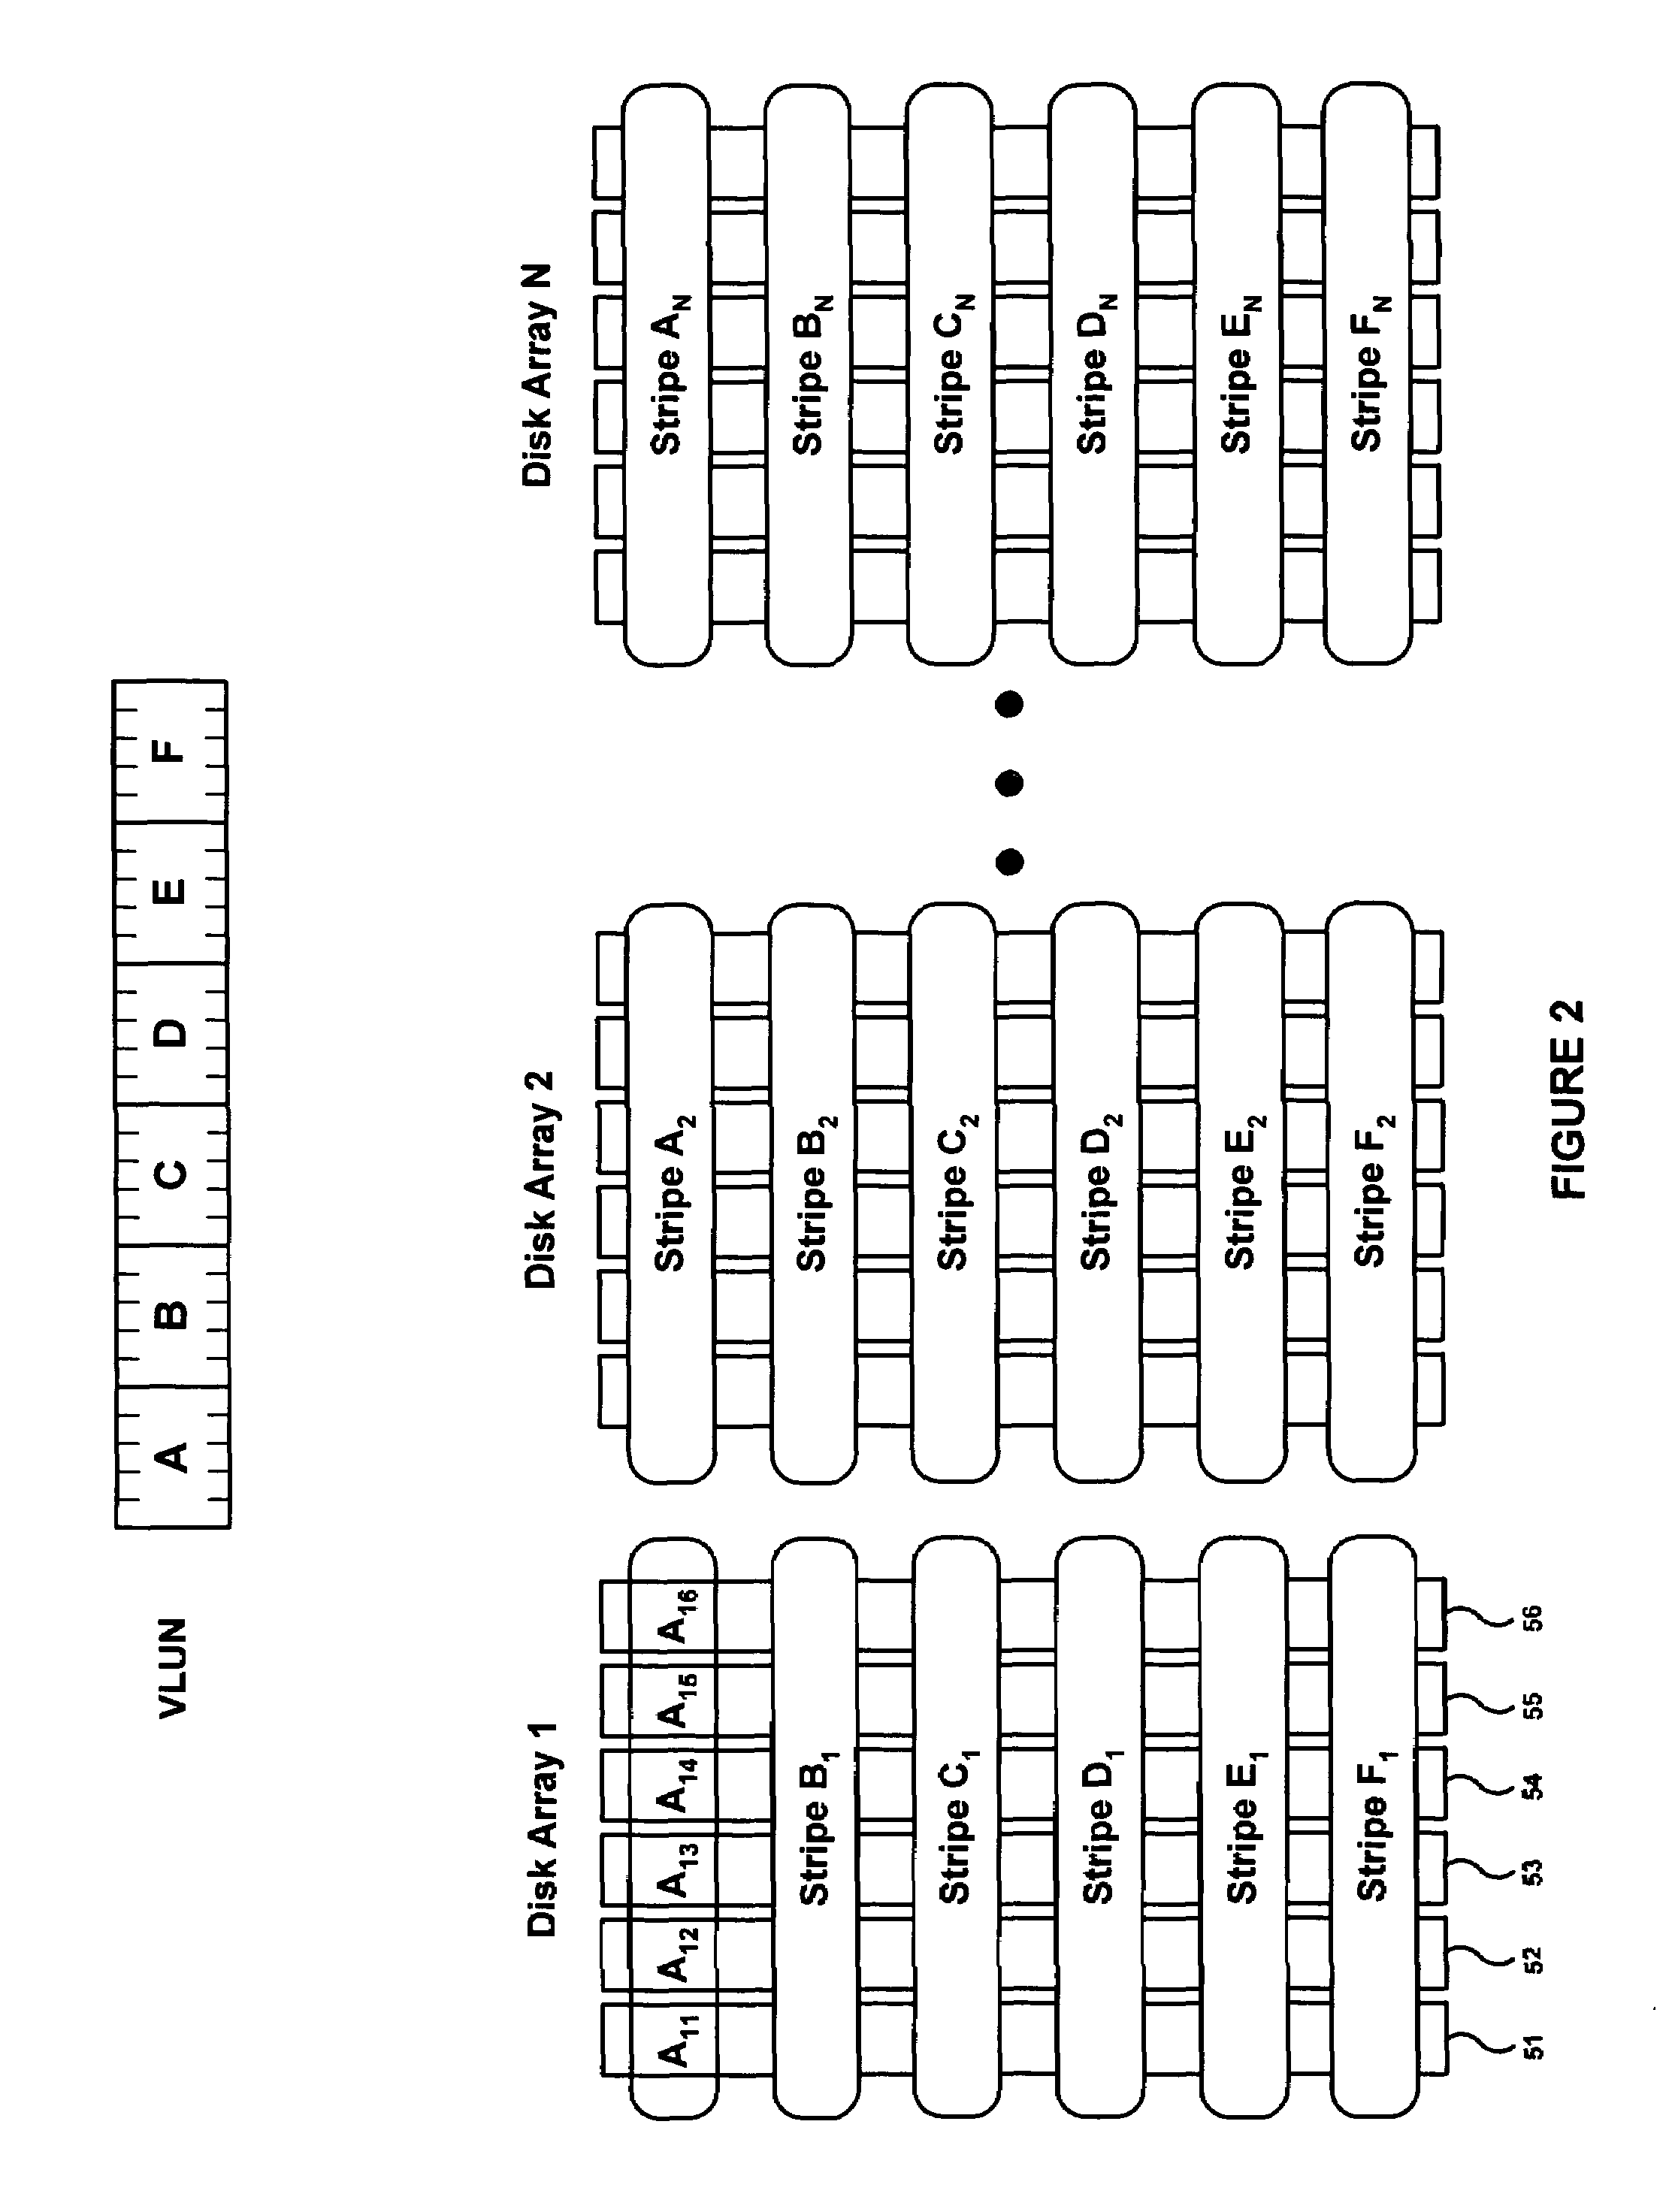 Staggered writing for data storage systems